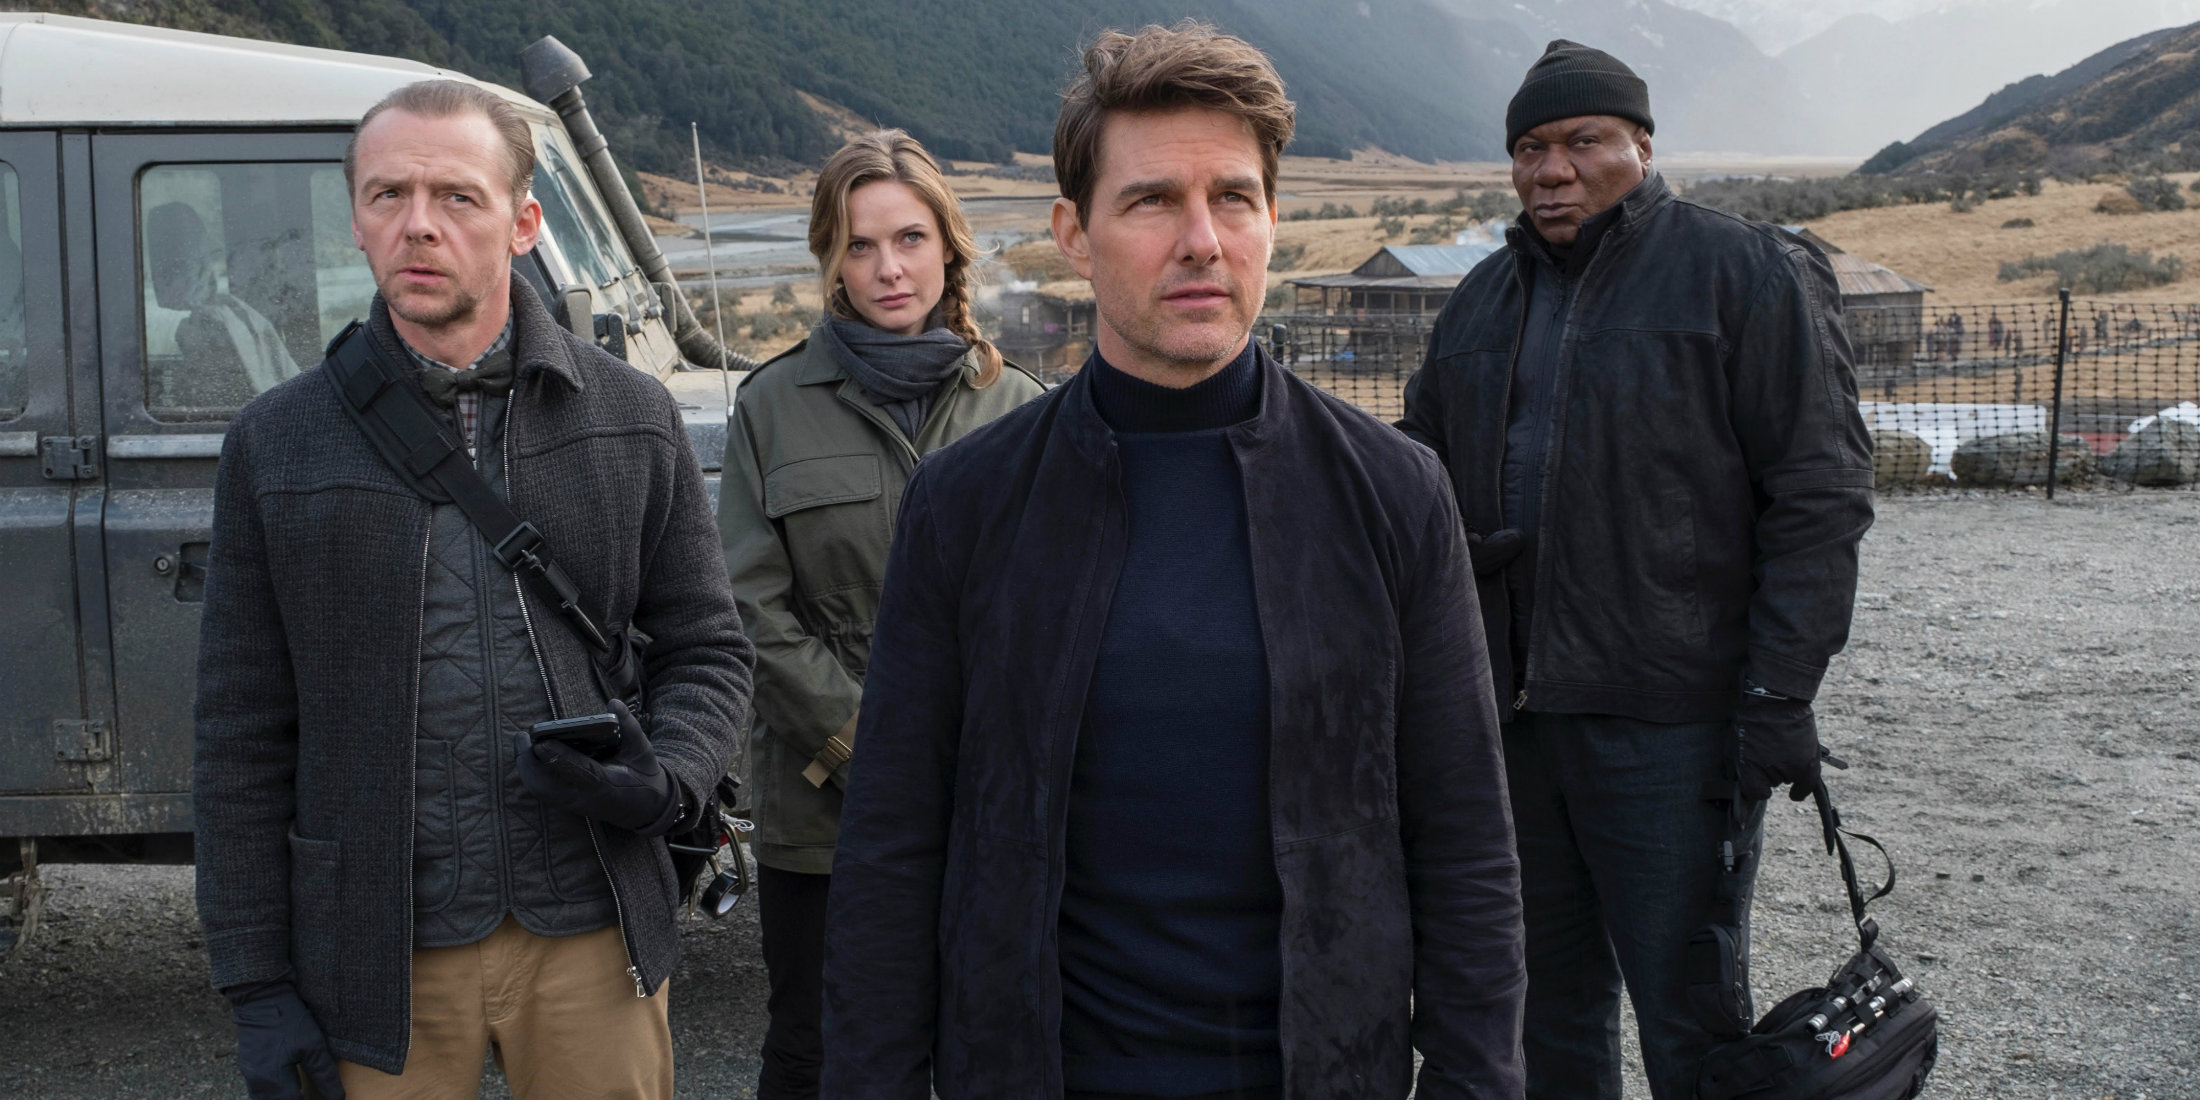 'Mission: Impossible'